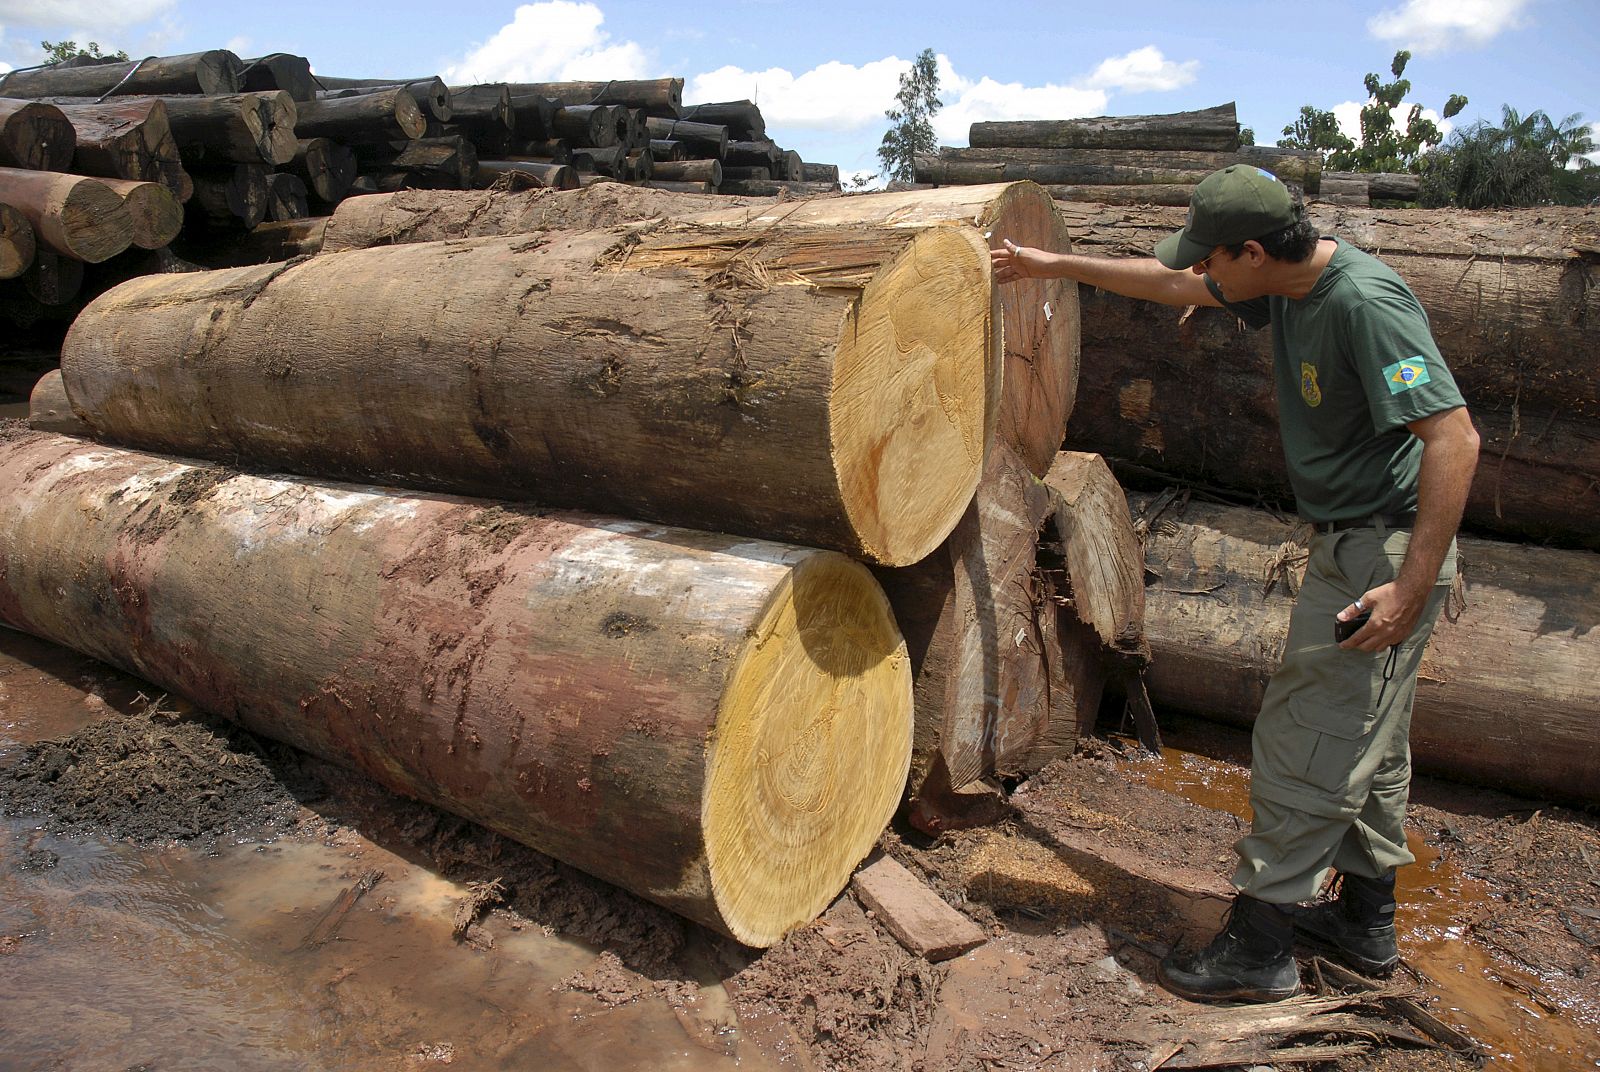 A National Force official checks illegally logged timber, which has been confiscated, in the northeastern state of Para